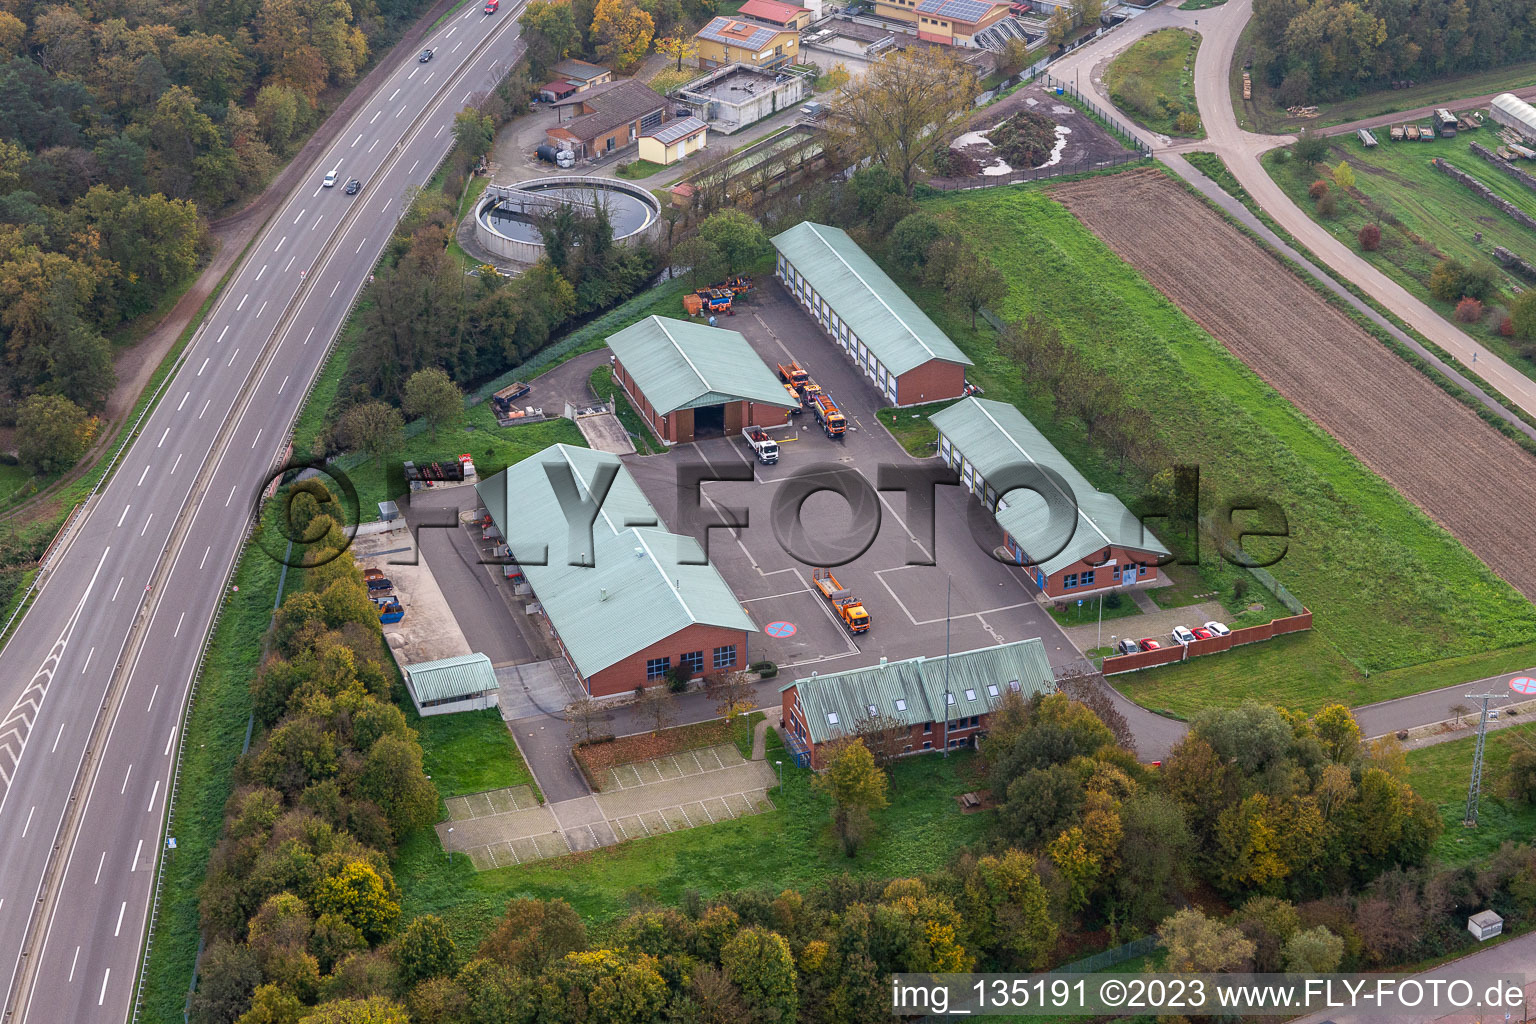 Aerial view of Highway maintenance department in Kandel in the state Rhineland-Palatinate, Germany